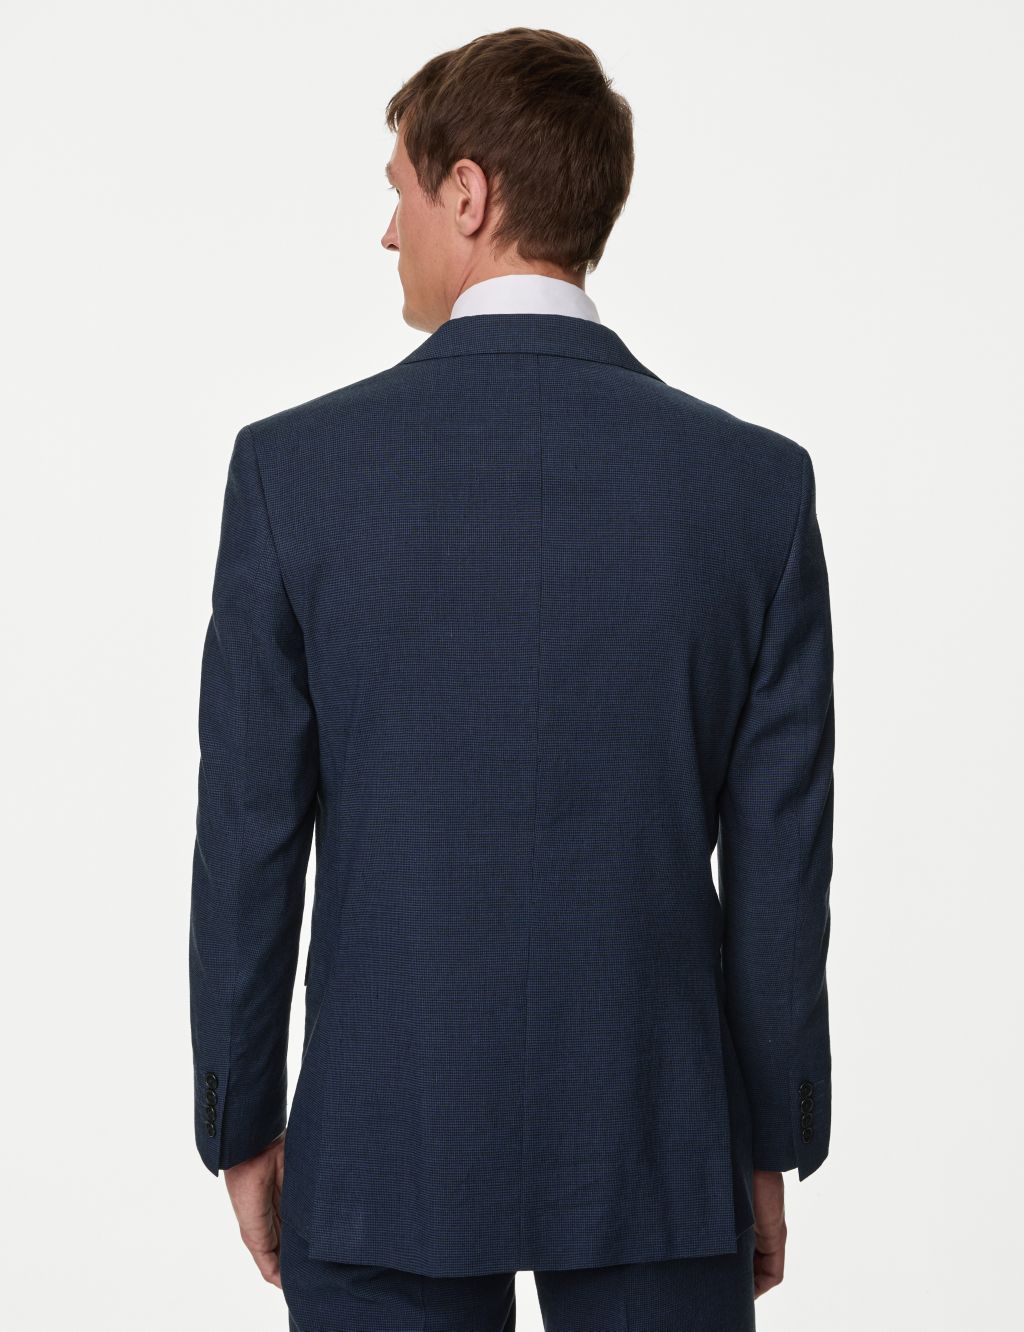 Tailored Fit Italian Linen Miracle™ Suit Jacket 4 of 7